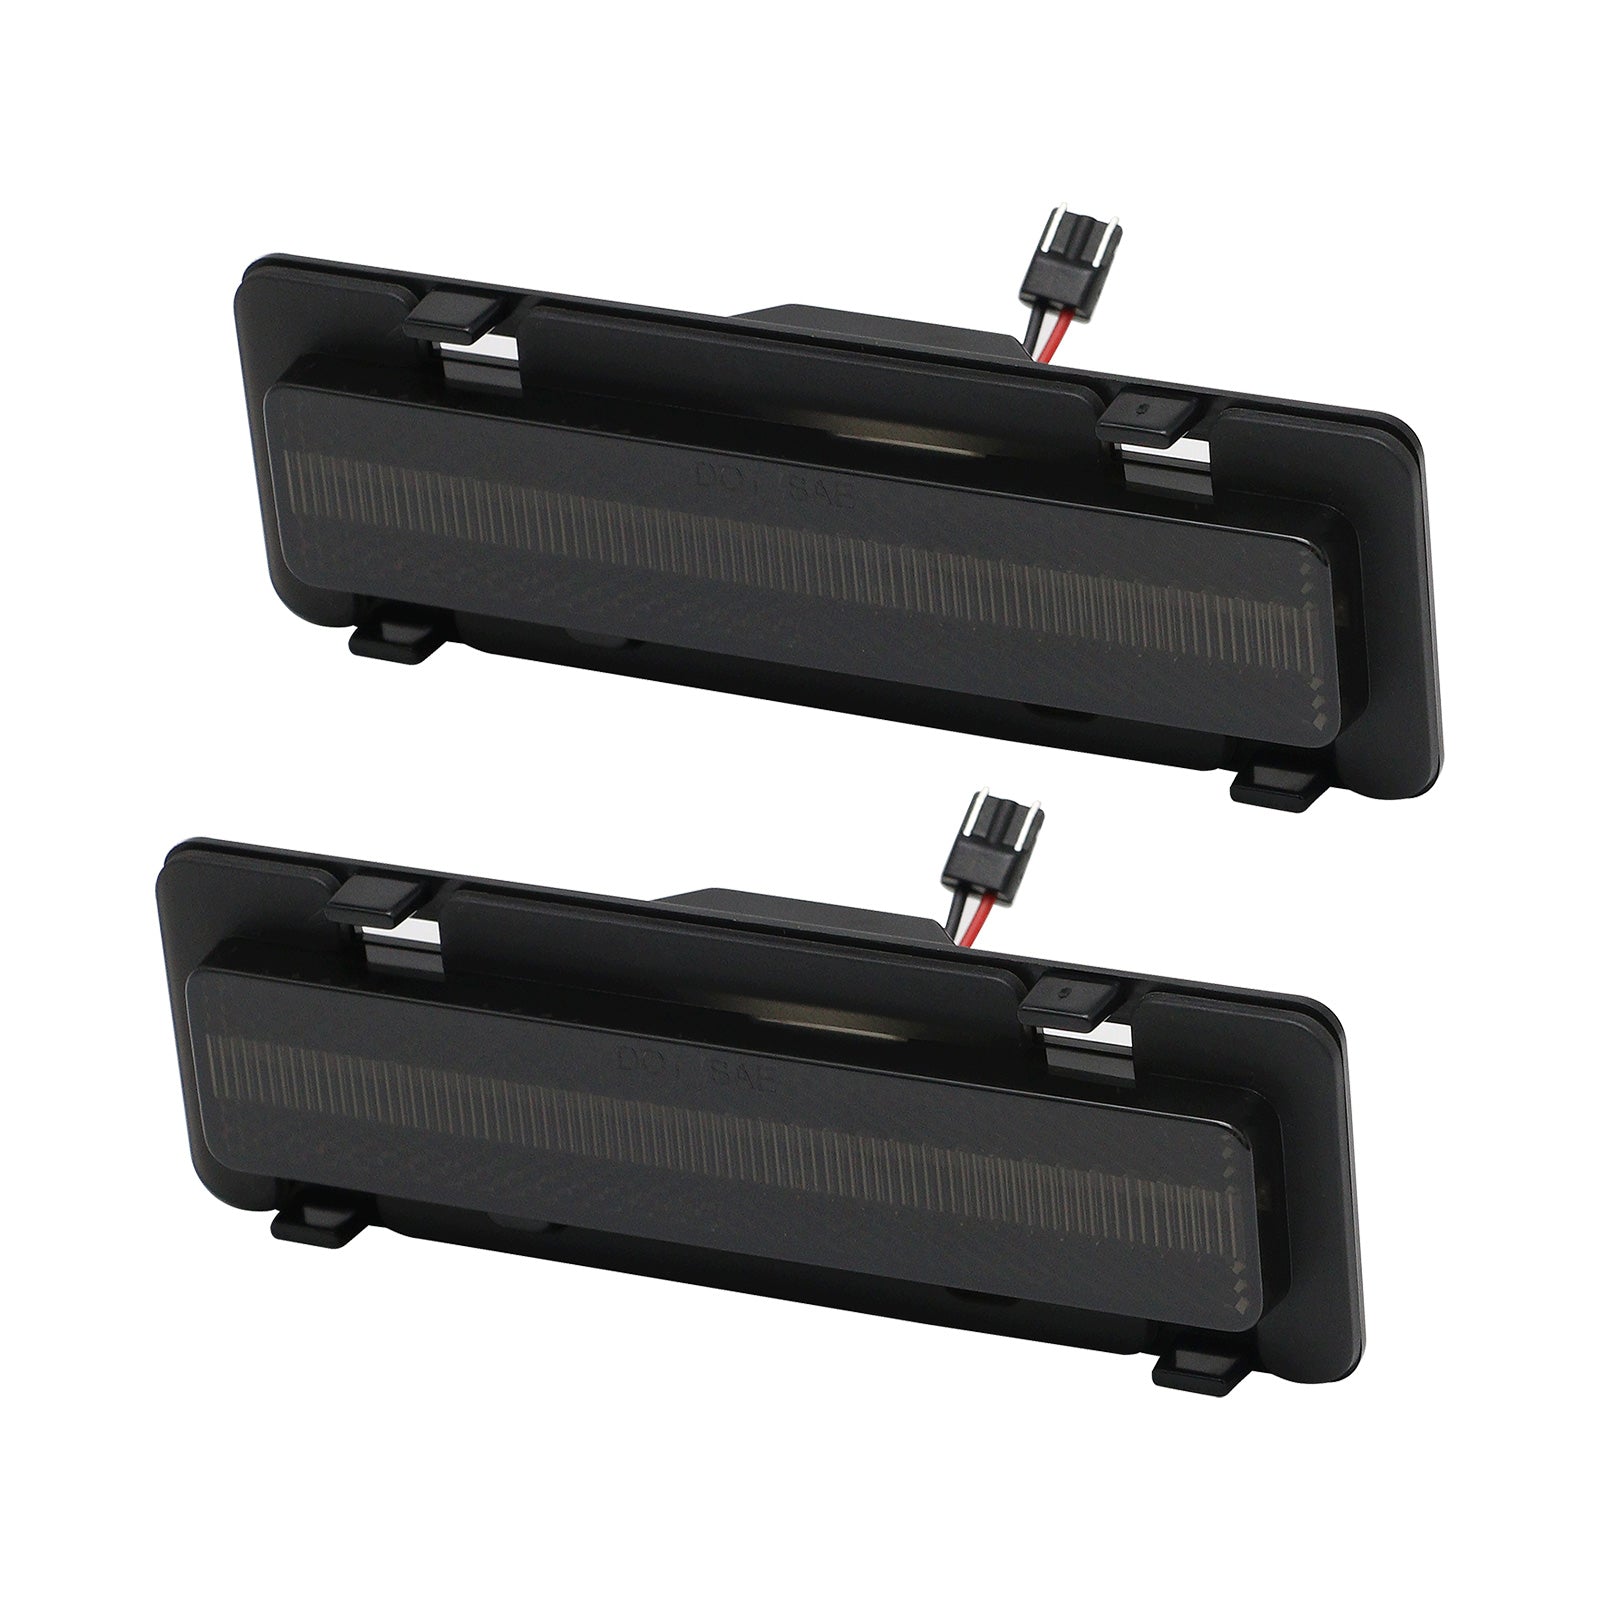 1982-1992 Camaro and Firebird "Strip Style" LED Side Markers